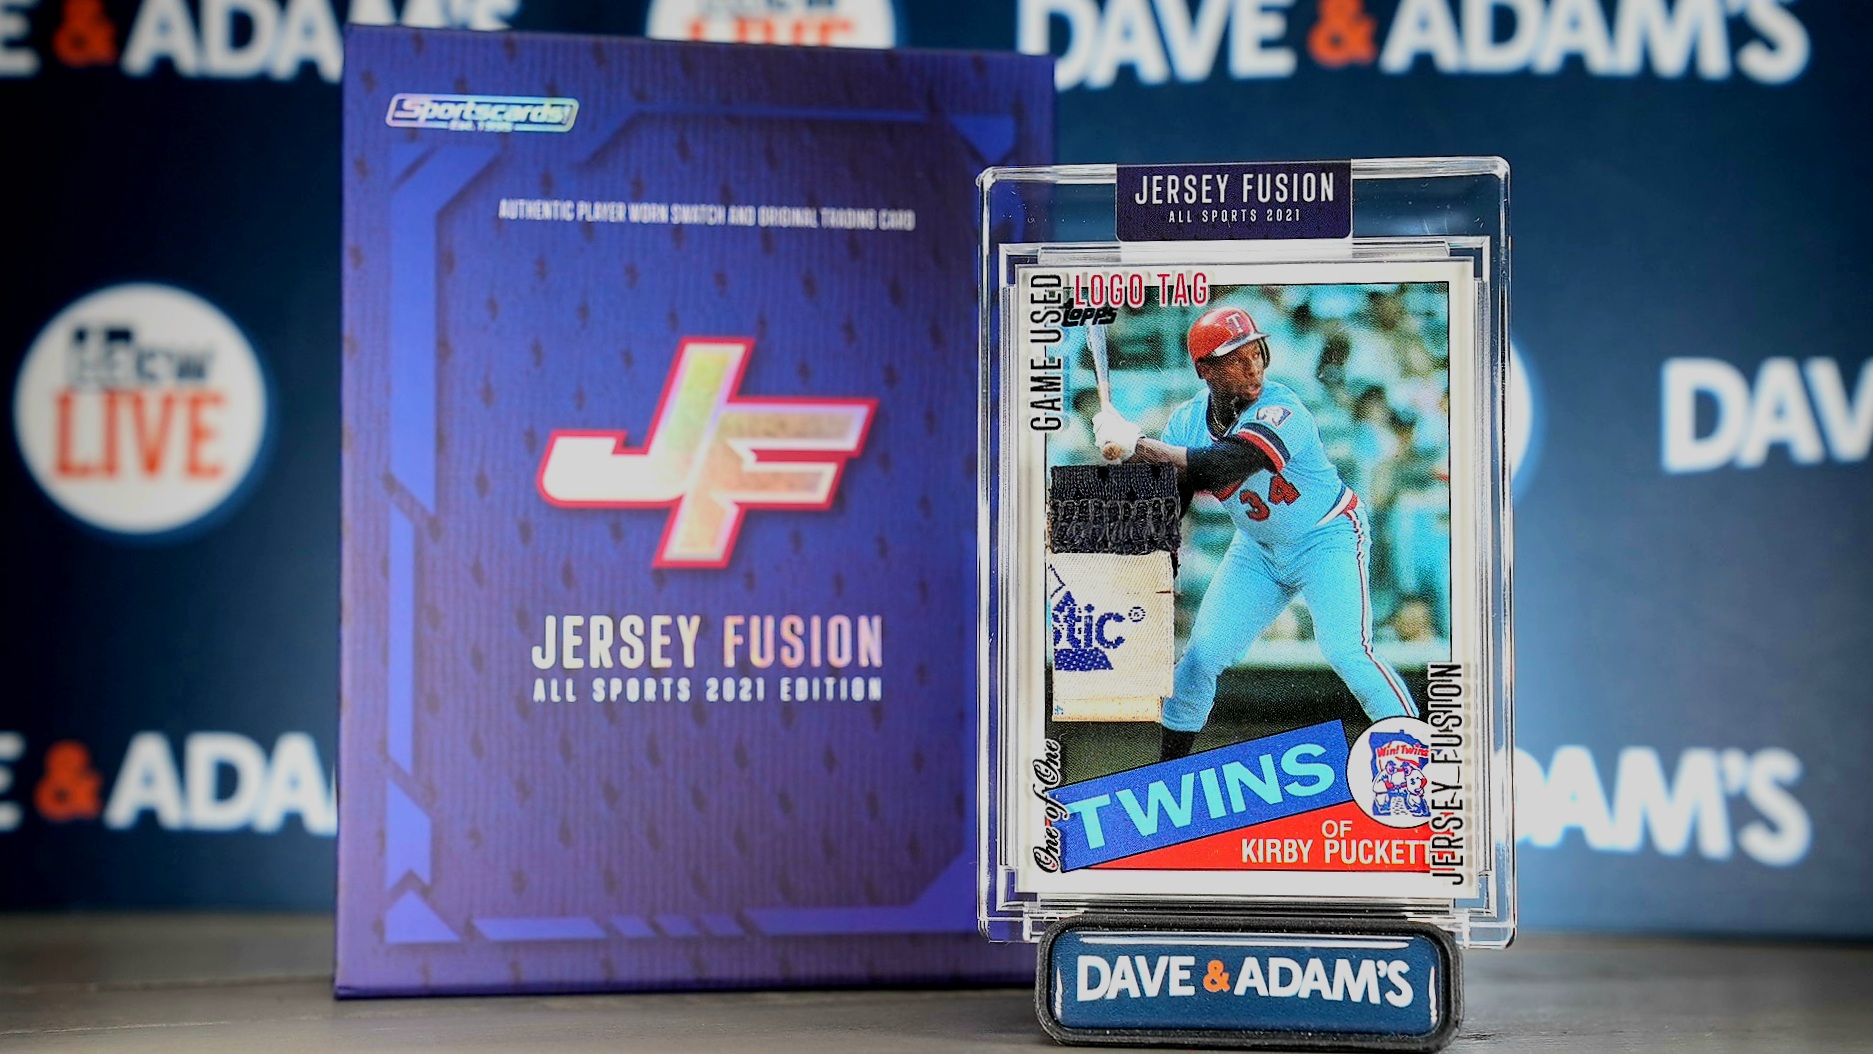 2021 Jersey Fusion Albert Pujols Game Used Swatch